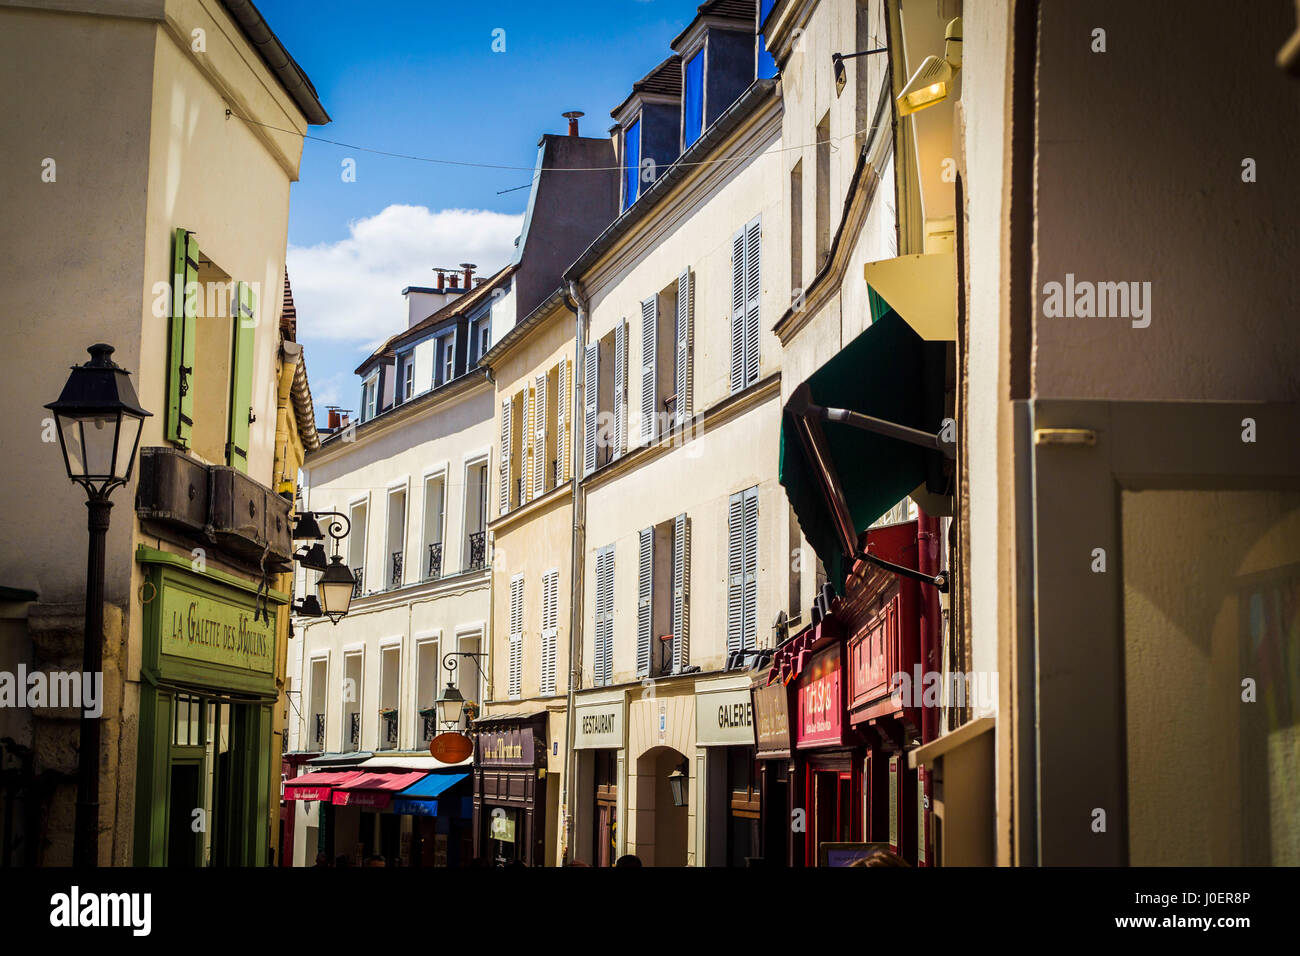 Light wraps around a side street in the Montmartre neighborhood of Paris, France. Stock Photo